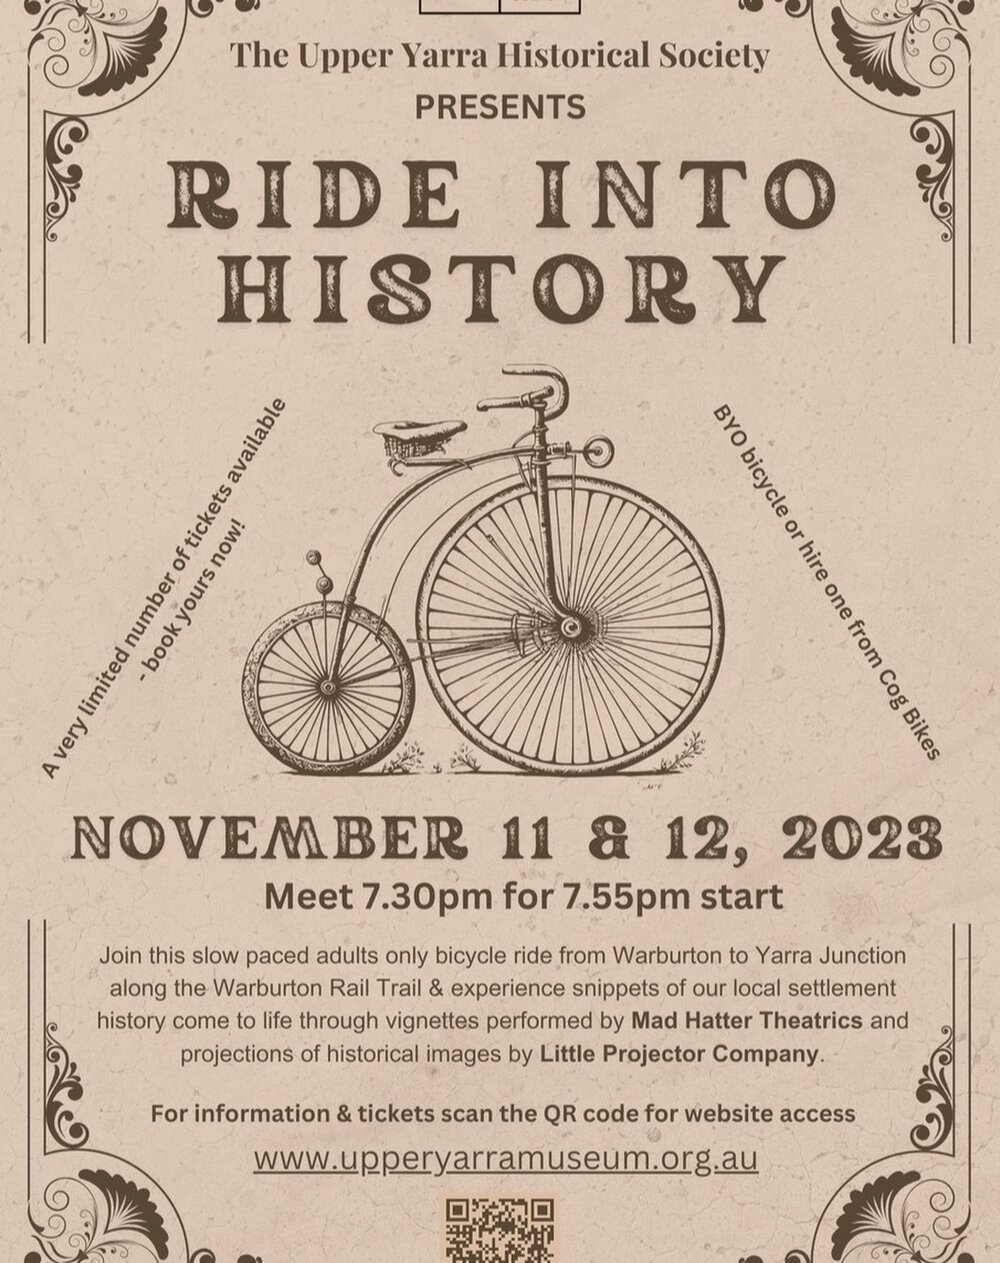 Join our slow paced bicycle ride from Warburton to Yarra Junction along the Warburton Rail Trail and experience snippets of our local settlement history come to life through vignettes performed by Mad Hatter Theatrics and projections of historical im